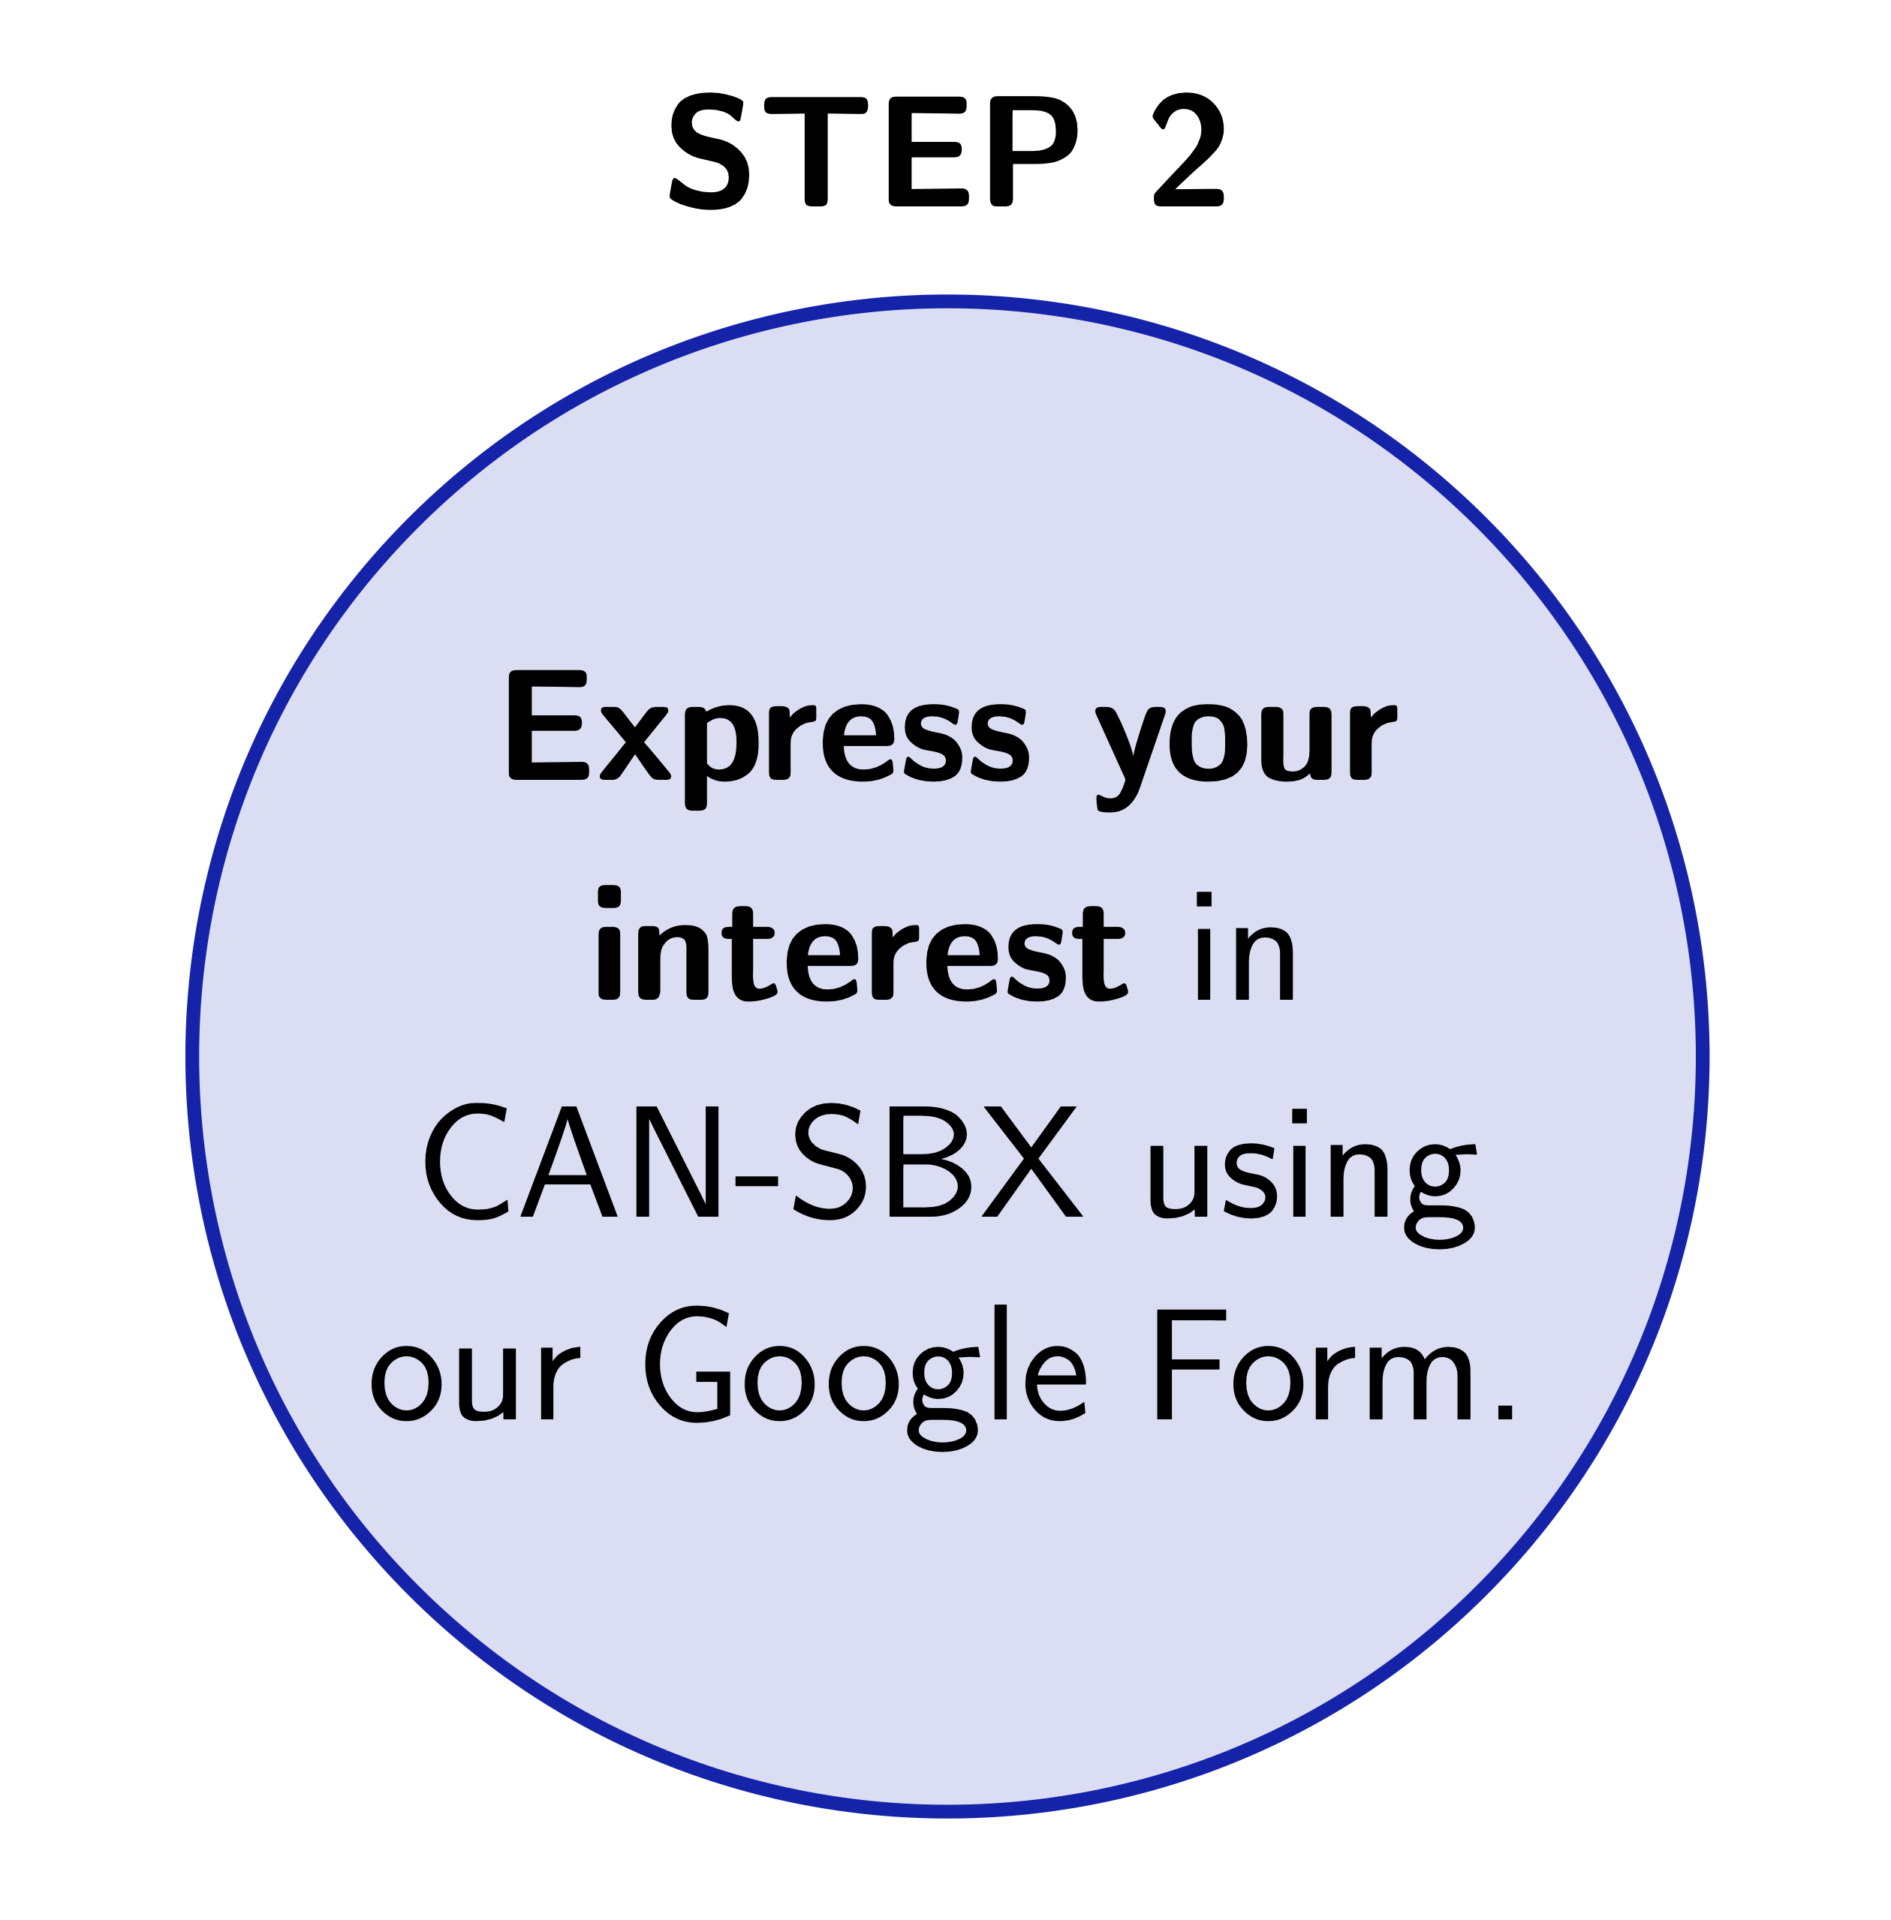 image of sbx step 2